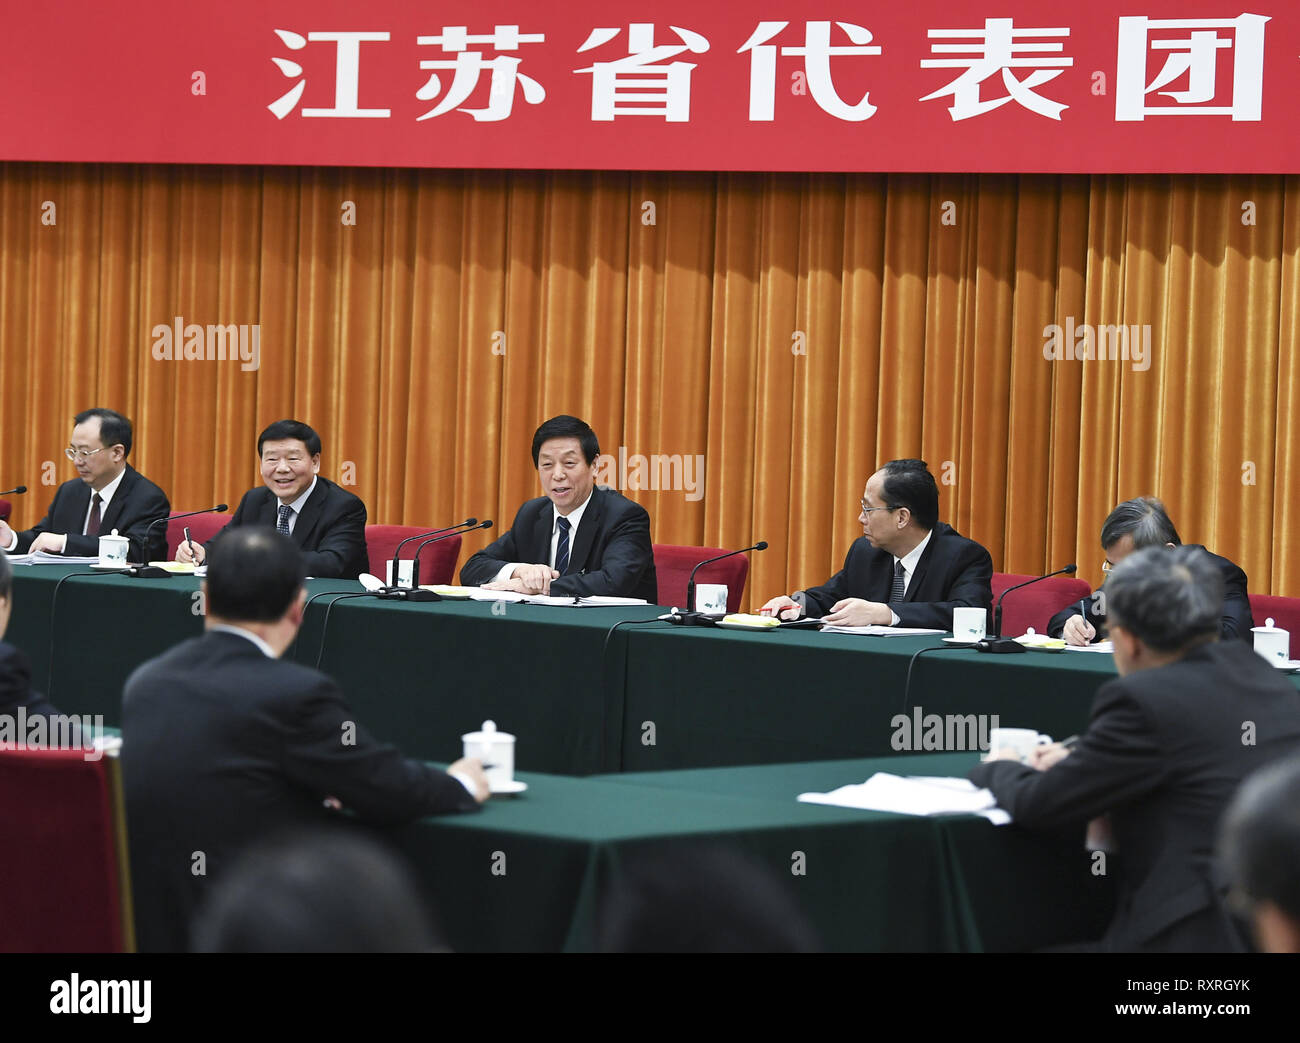 (190310) -- BEIJING, March 10, 2019 (Xinhua) -- Li Zhanshu, a member of the Standing Committee of the Political Bureau of the Communist Party of China (CPC) Central Committee and chairman of the National People's Congress (NPC) Standing Committee, deliberates with the delegation from Jiangsu Province at the second session of the 13th NPC in Beijing, capital of China, March 10, 2019. (Xinhua/Xie Huanchi) Stock Photo